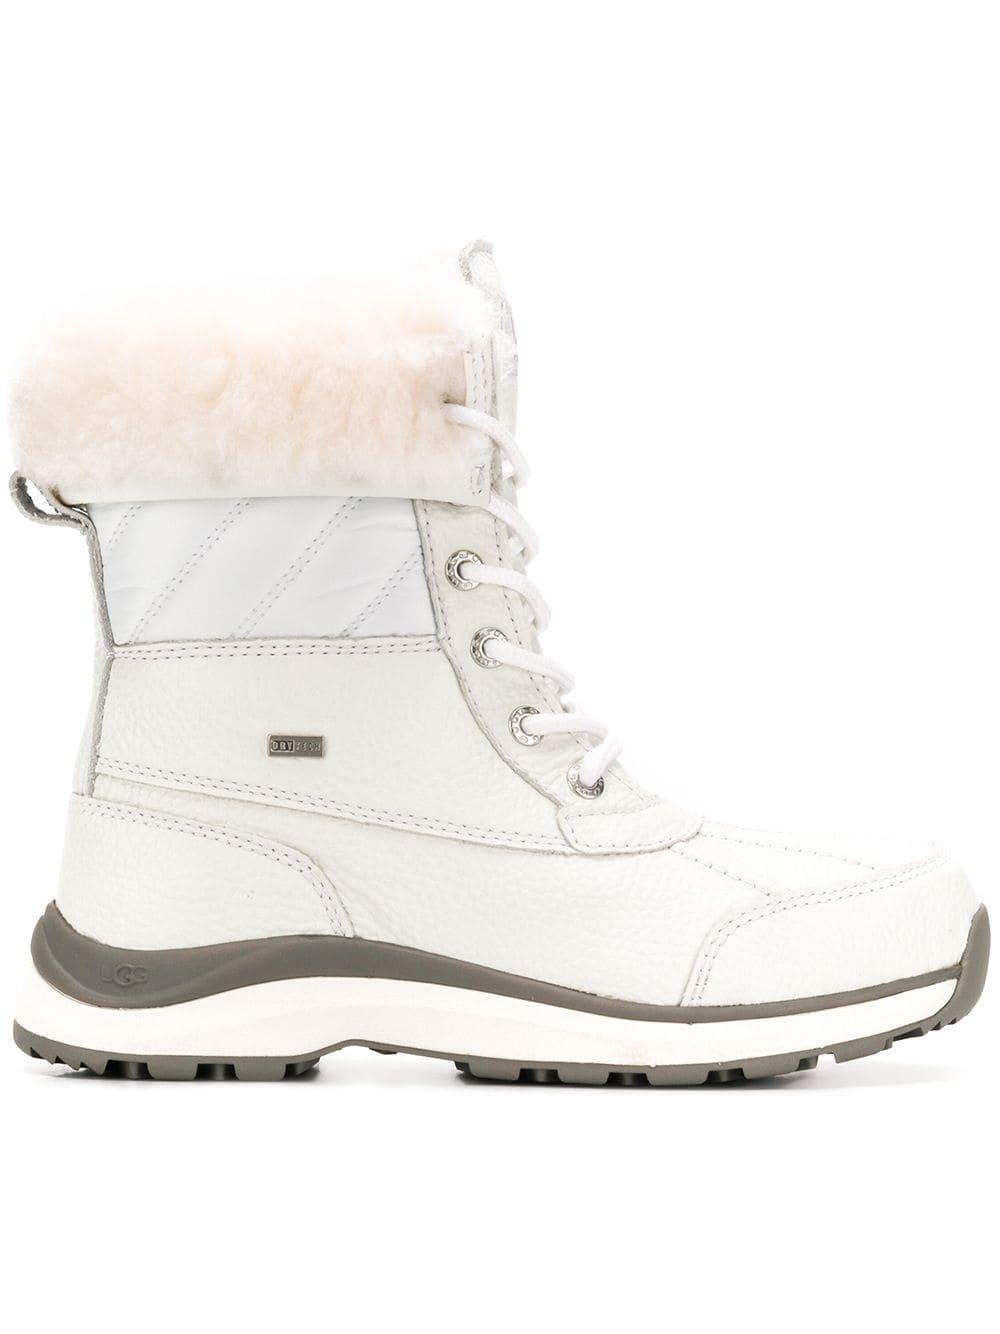 UGG Wool Fur Trim Lace-up Boots in White - Lyst